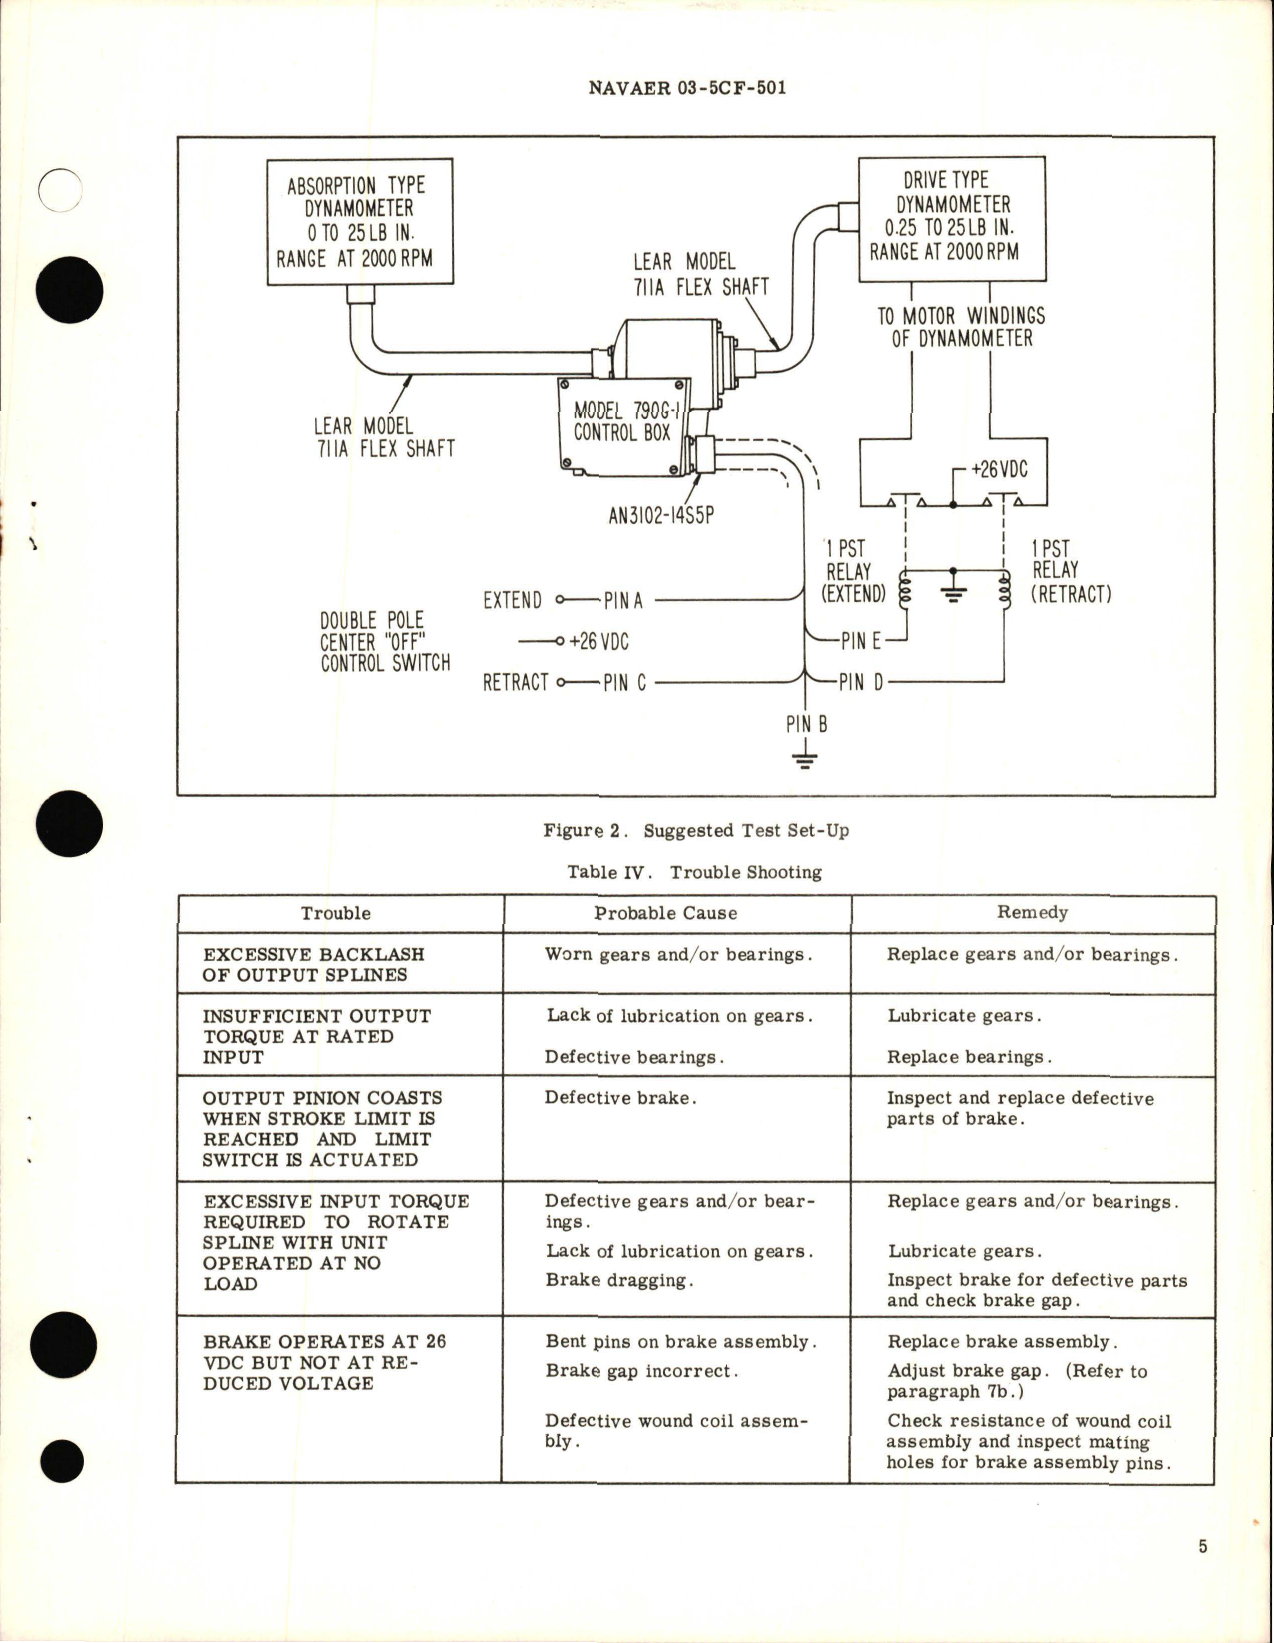 Sample page 5 from AirCorps Library document: Overhaul Instructions with Parts Breakdown for Control Box - Parts 110433-02, 110433-03 and 110433-04